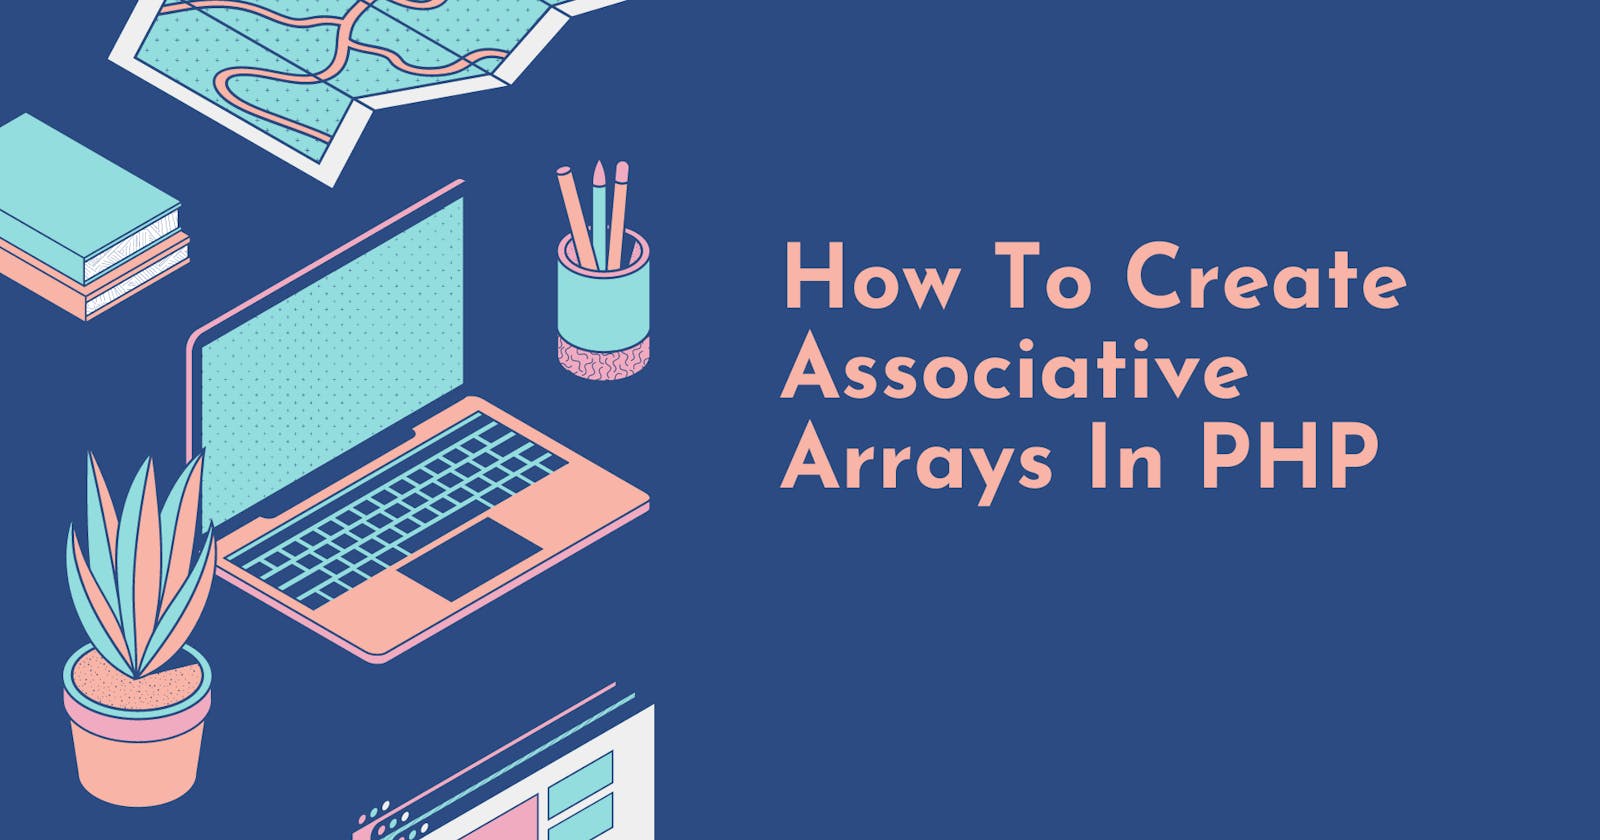 How To Create Associative Arrays In PHP